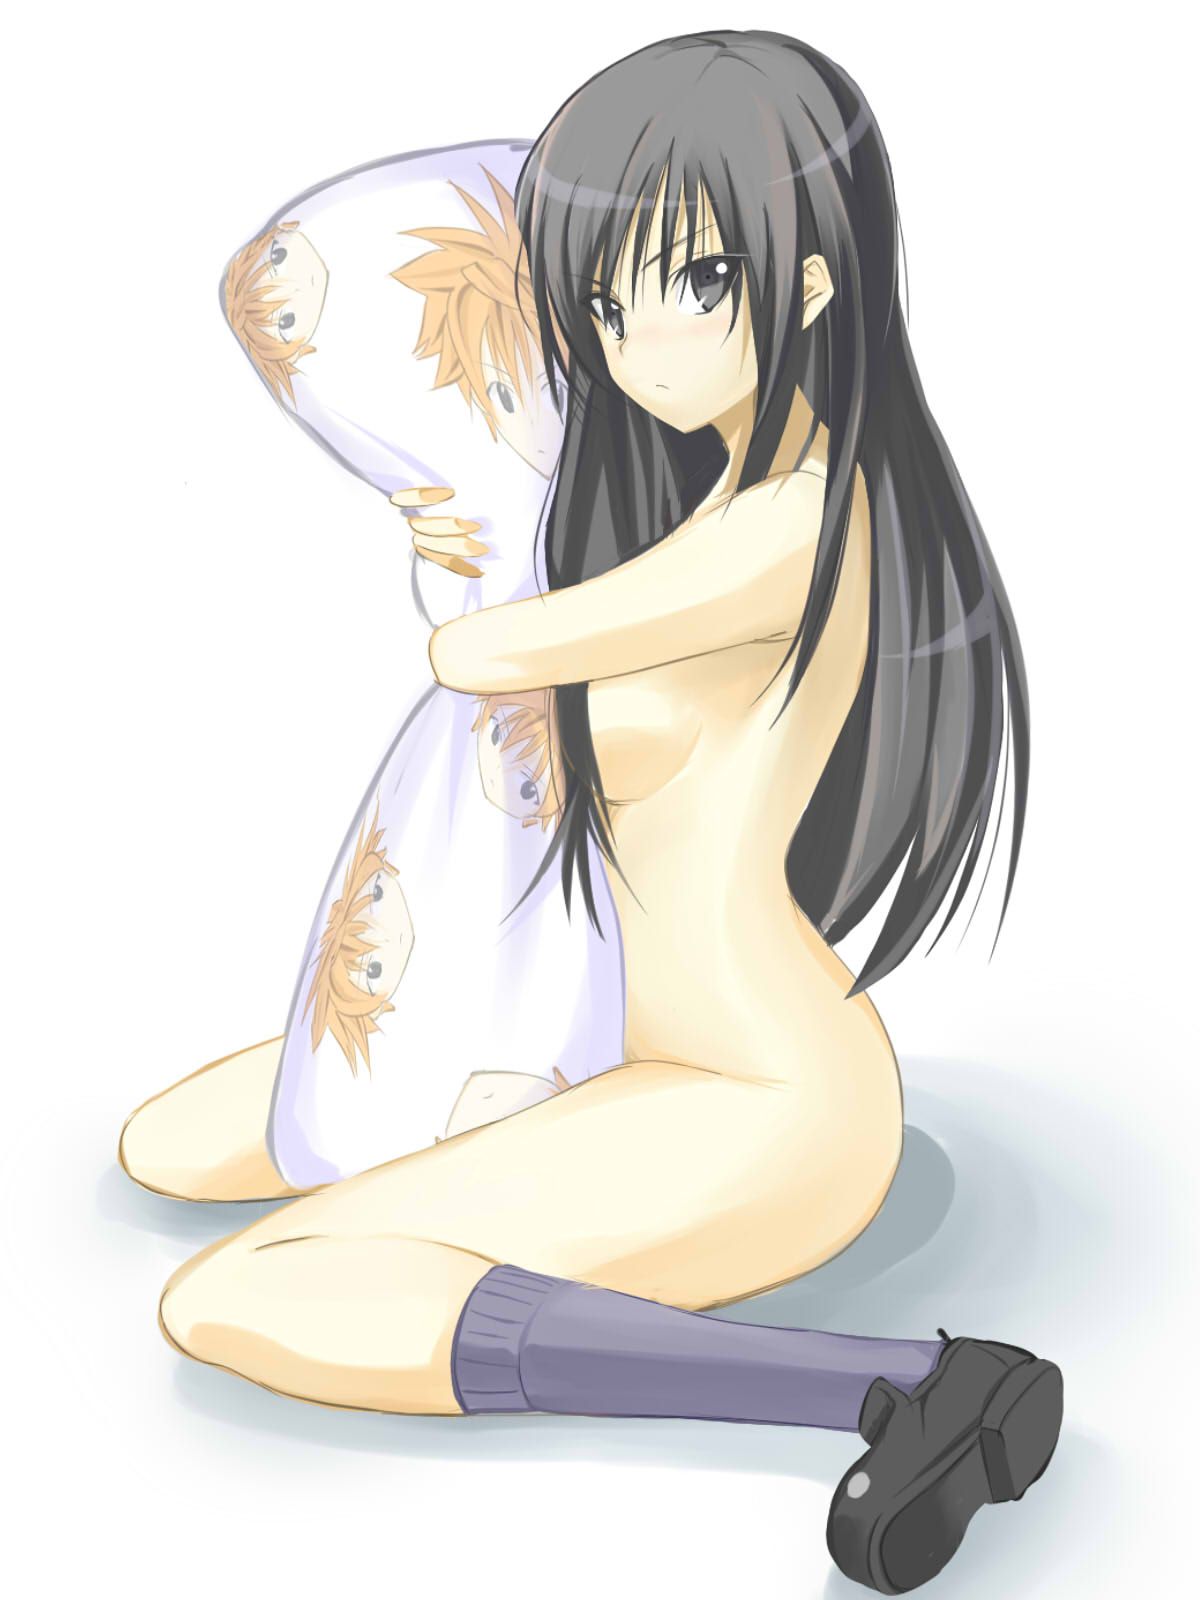 2-d black hair long girl is the cutest in the world! 50 sheets 44